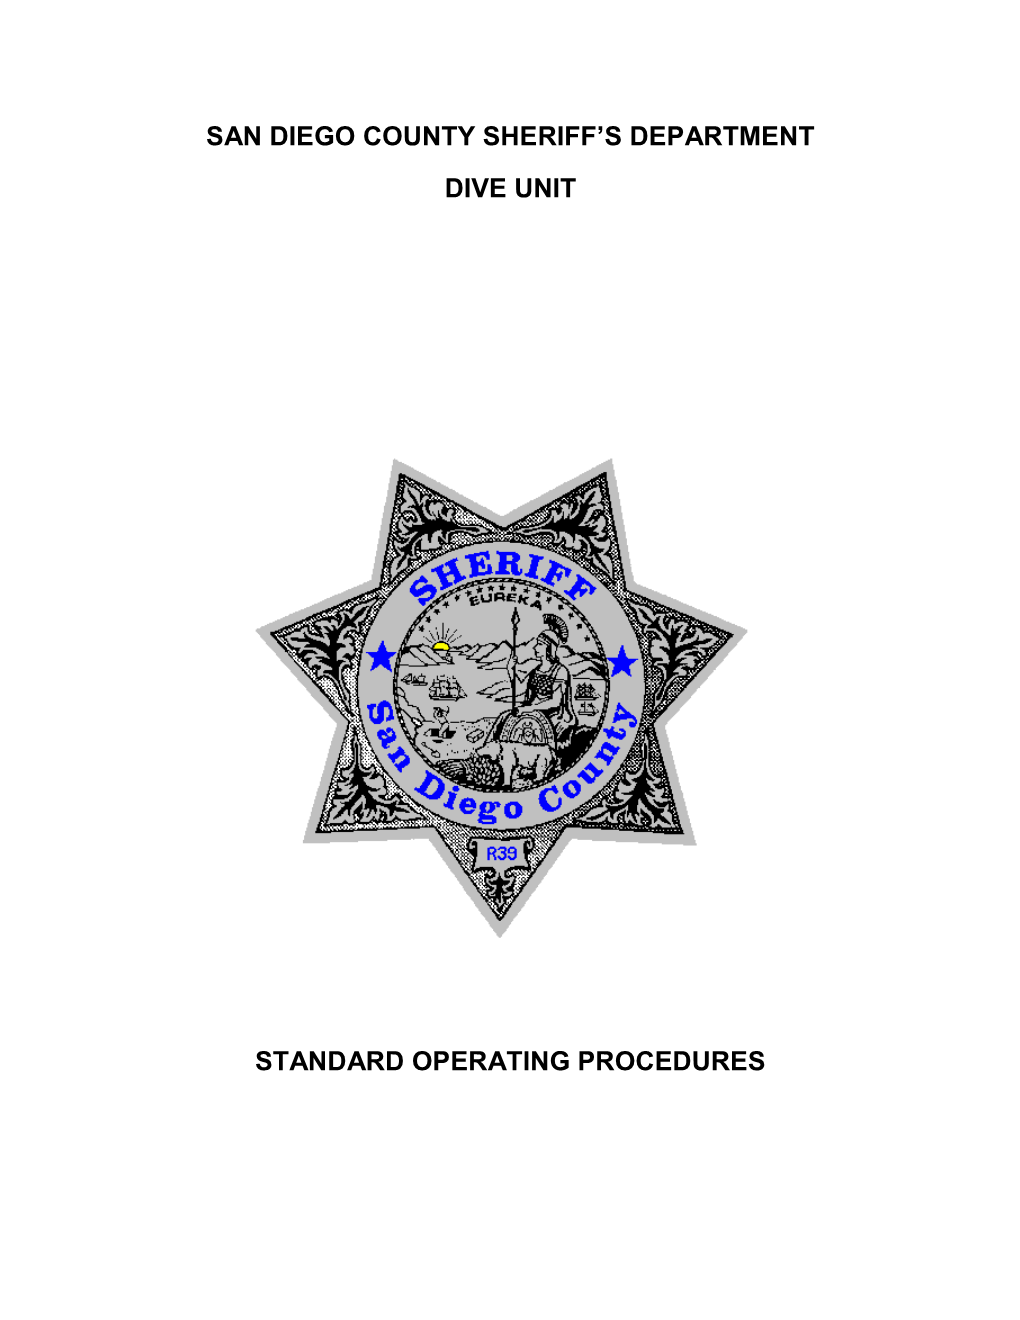 San Diego County Sheriff's Department Dive Unit Standard Operating Procedures